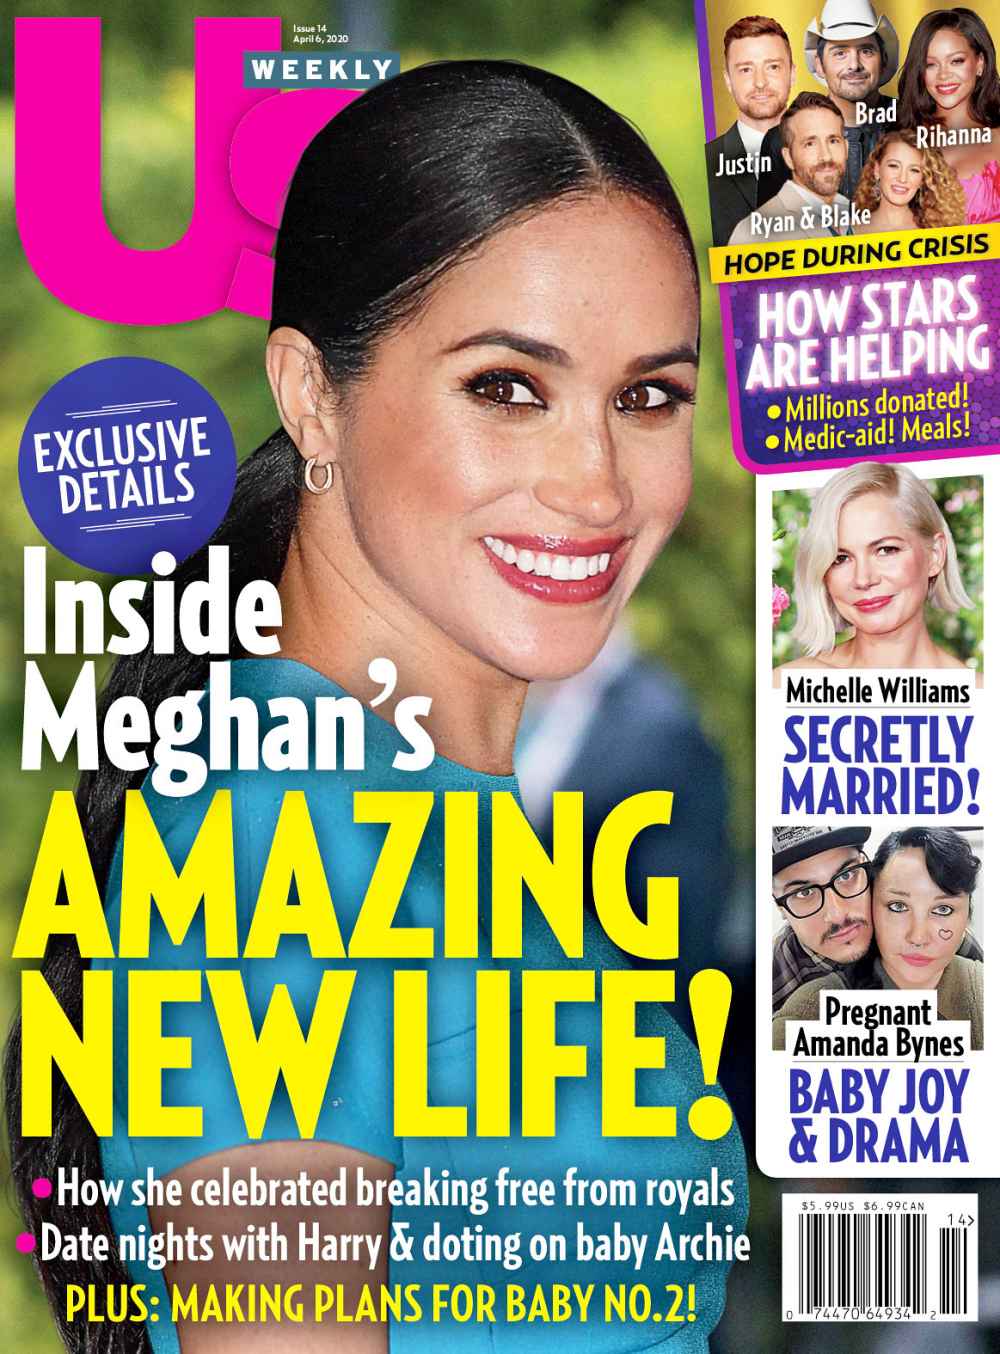 Why Prince Harry Meghan Markle Are Not in Rush to Have Baby No. 2